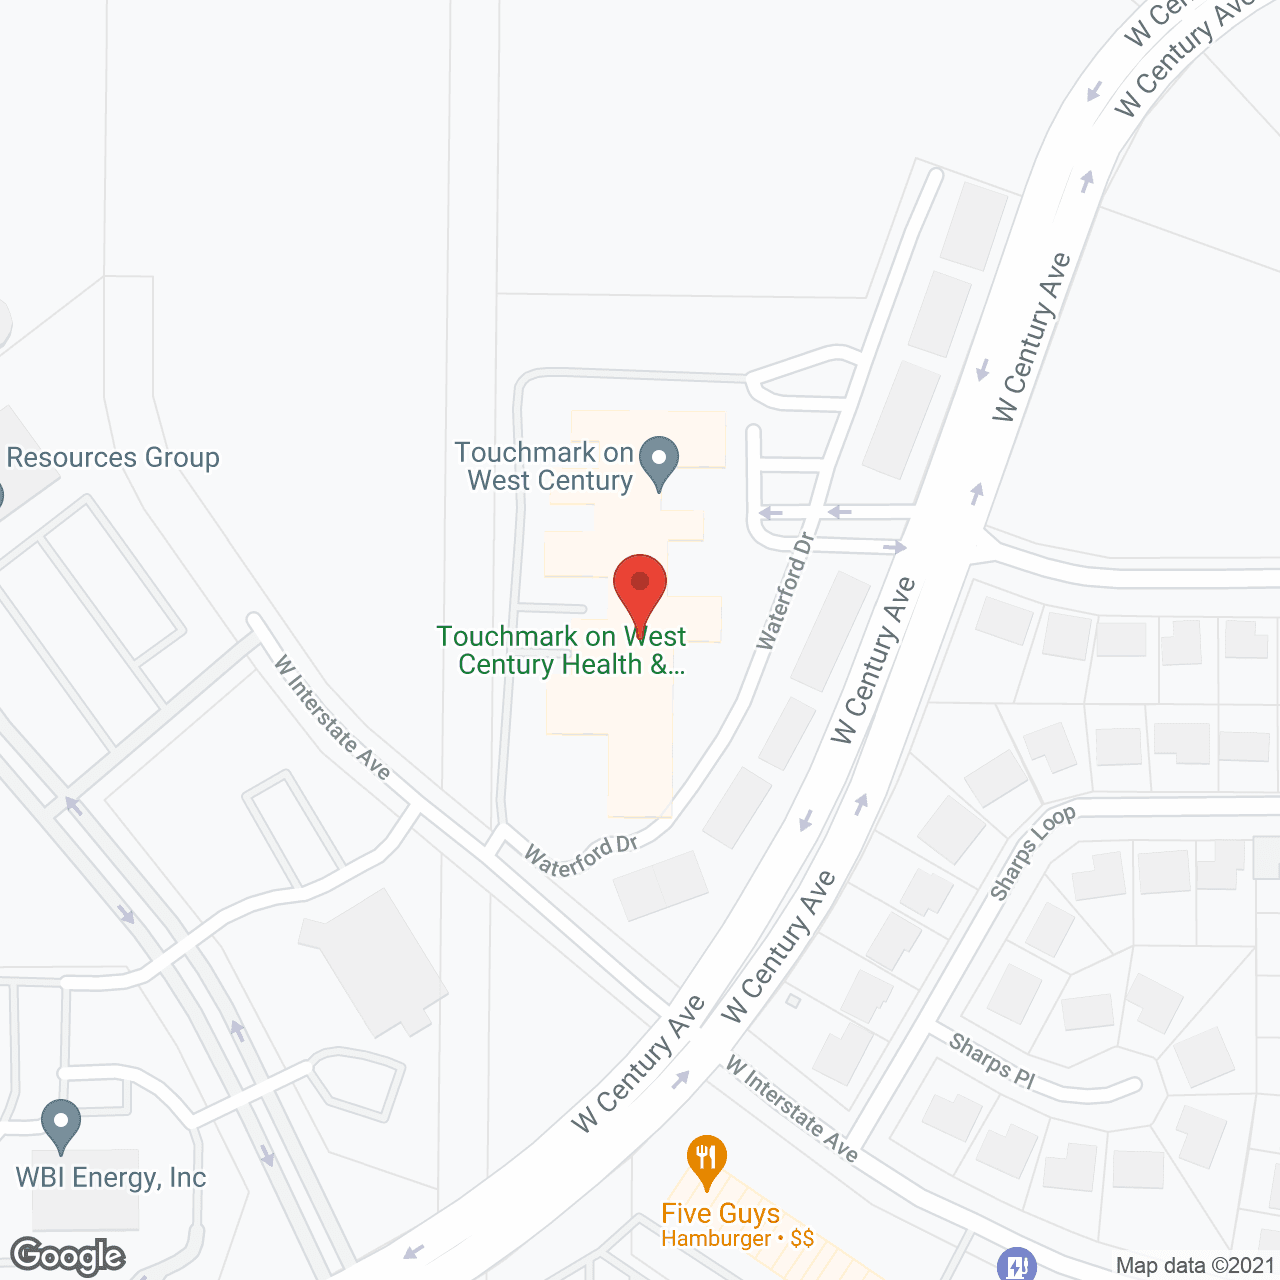 Touchmark on West Century in google map